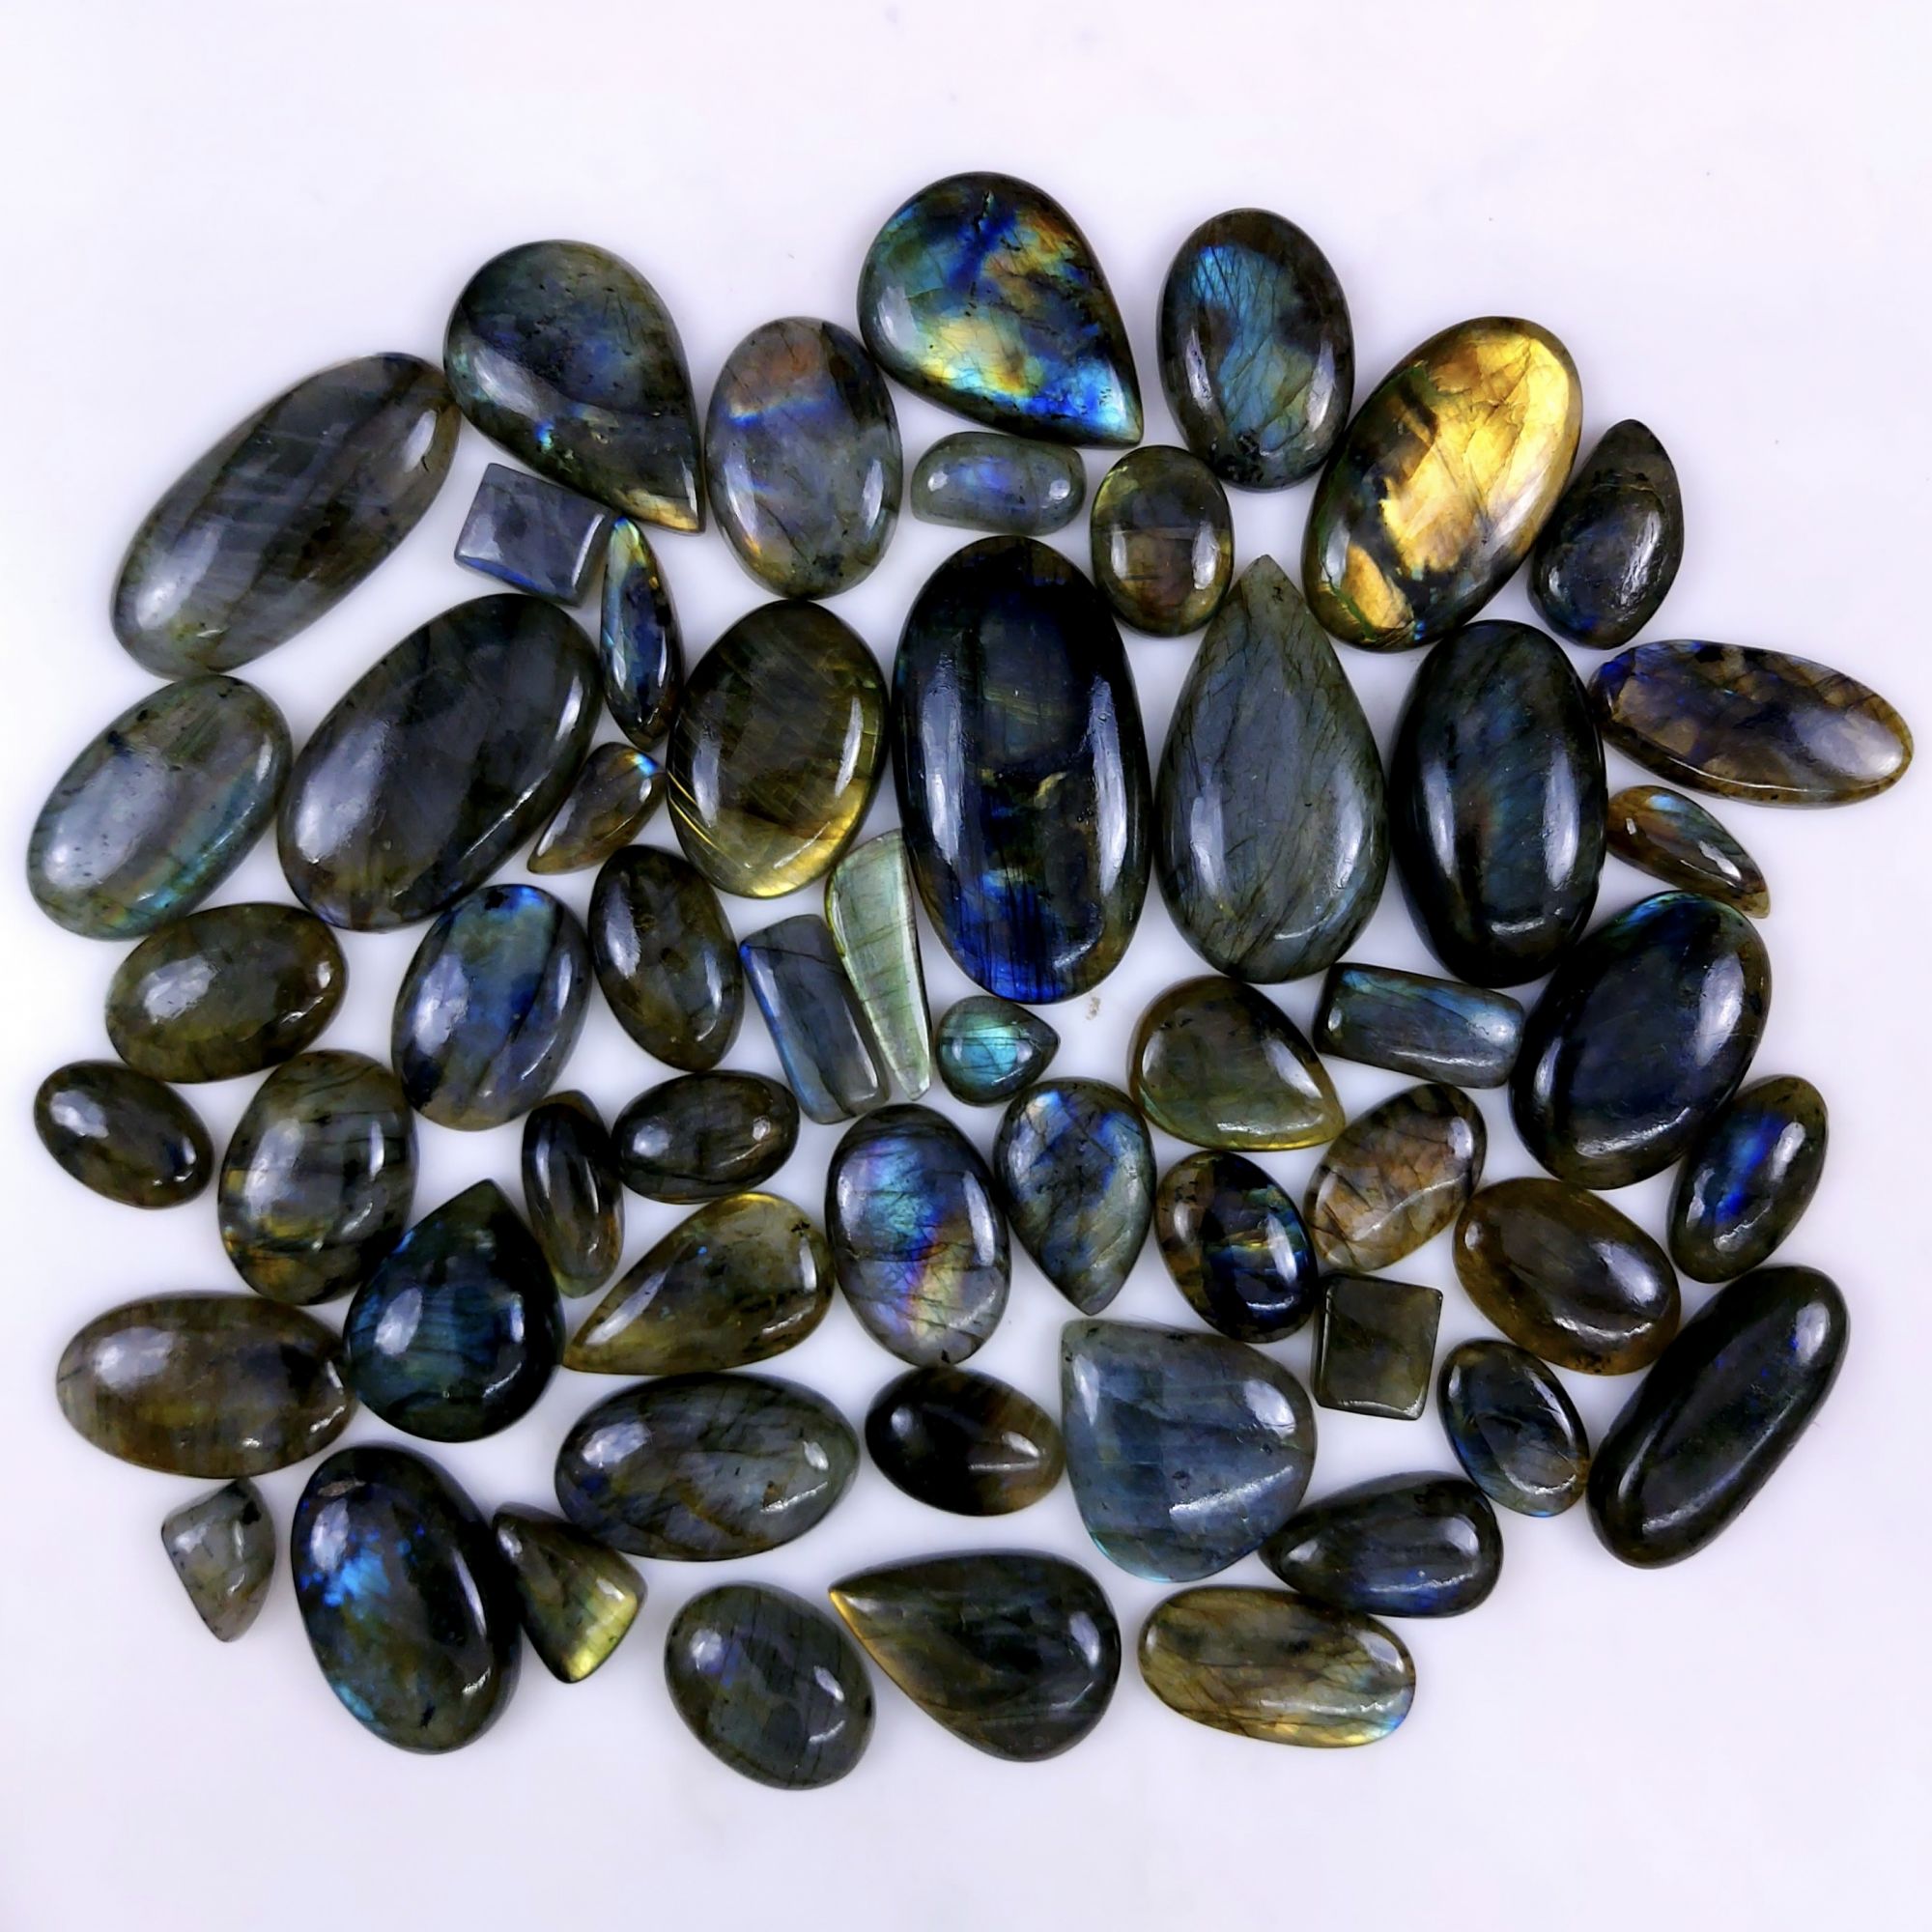 55pc 1757Cts Labradorite Cabochon Multifire Healing Crystal For Jewelry Supplies, Labradorite Necklace Handmade Wire Wrapped Gemstone Pendant 48x26 18x14mm#6348